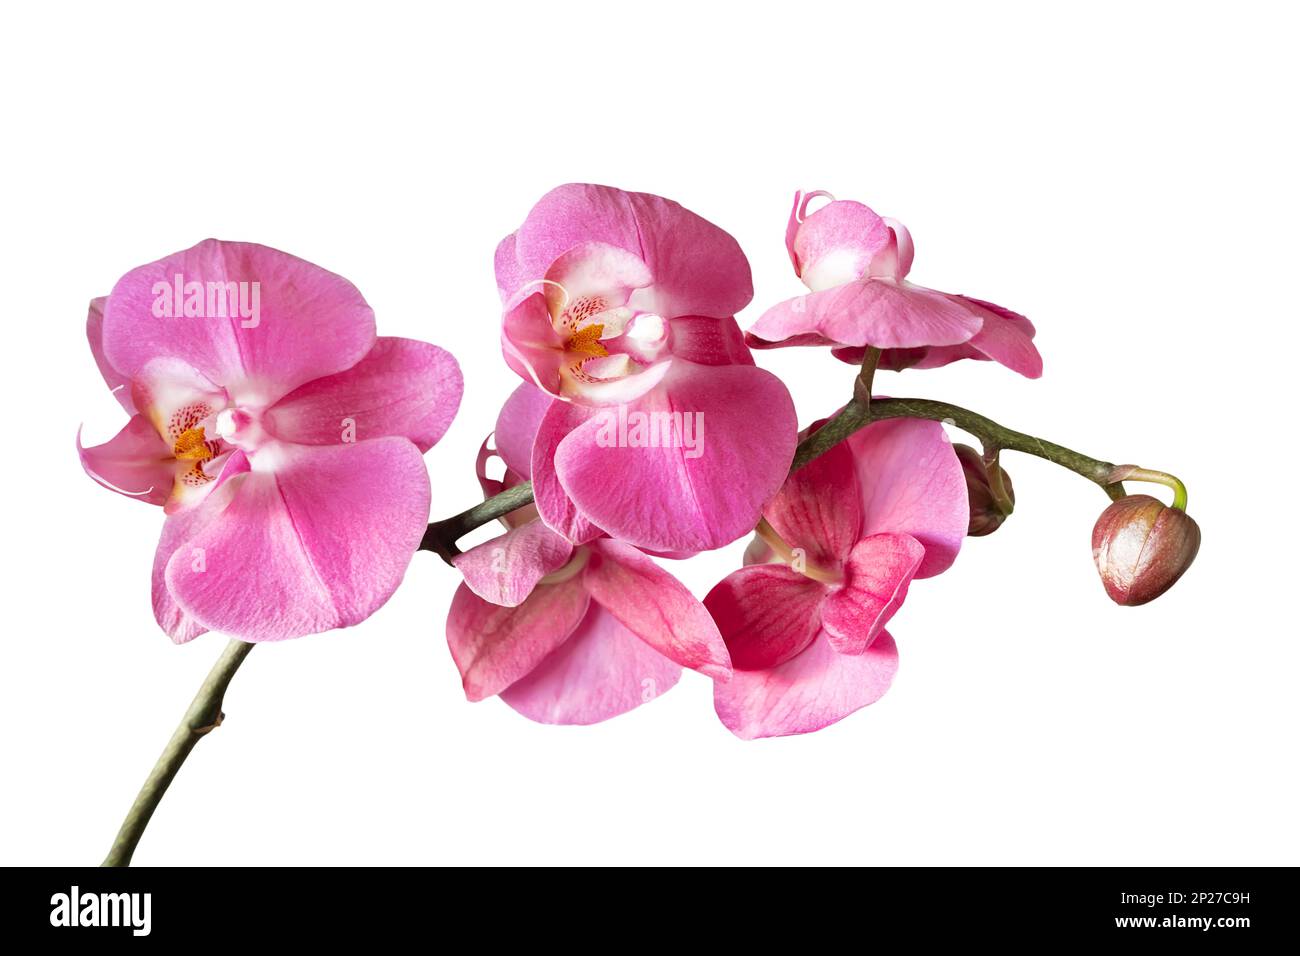 Purple orchid flower phalaenopsis, phalaenopsis or falah. Orchid branch with pink flowers isolated on white background. Floriculture, flower shop, hom Stock Photo